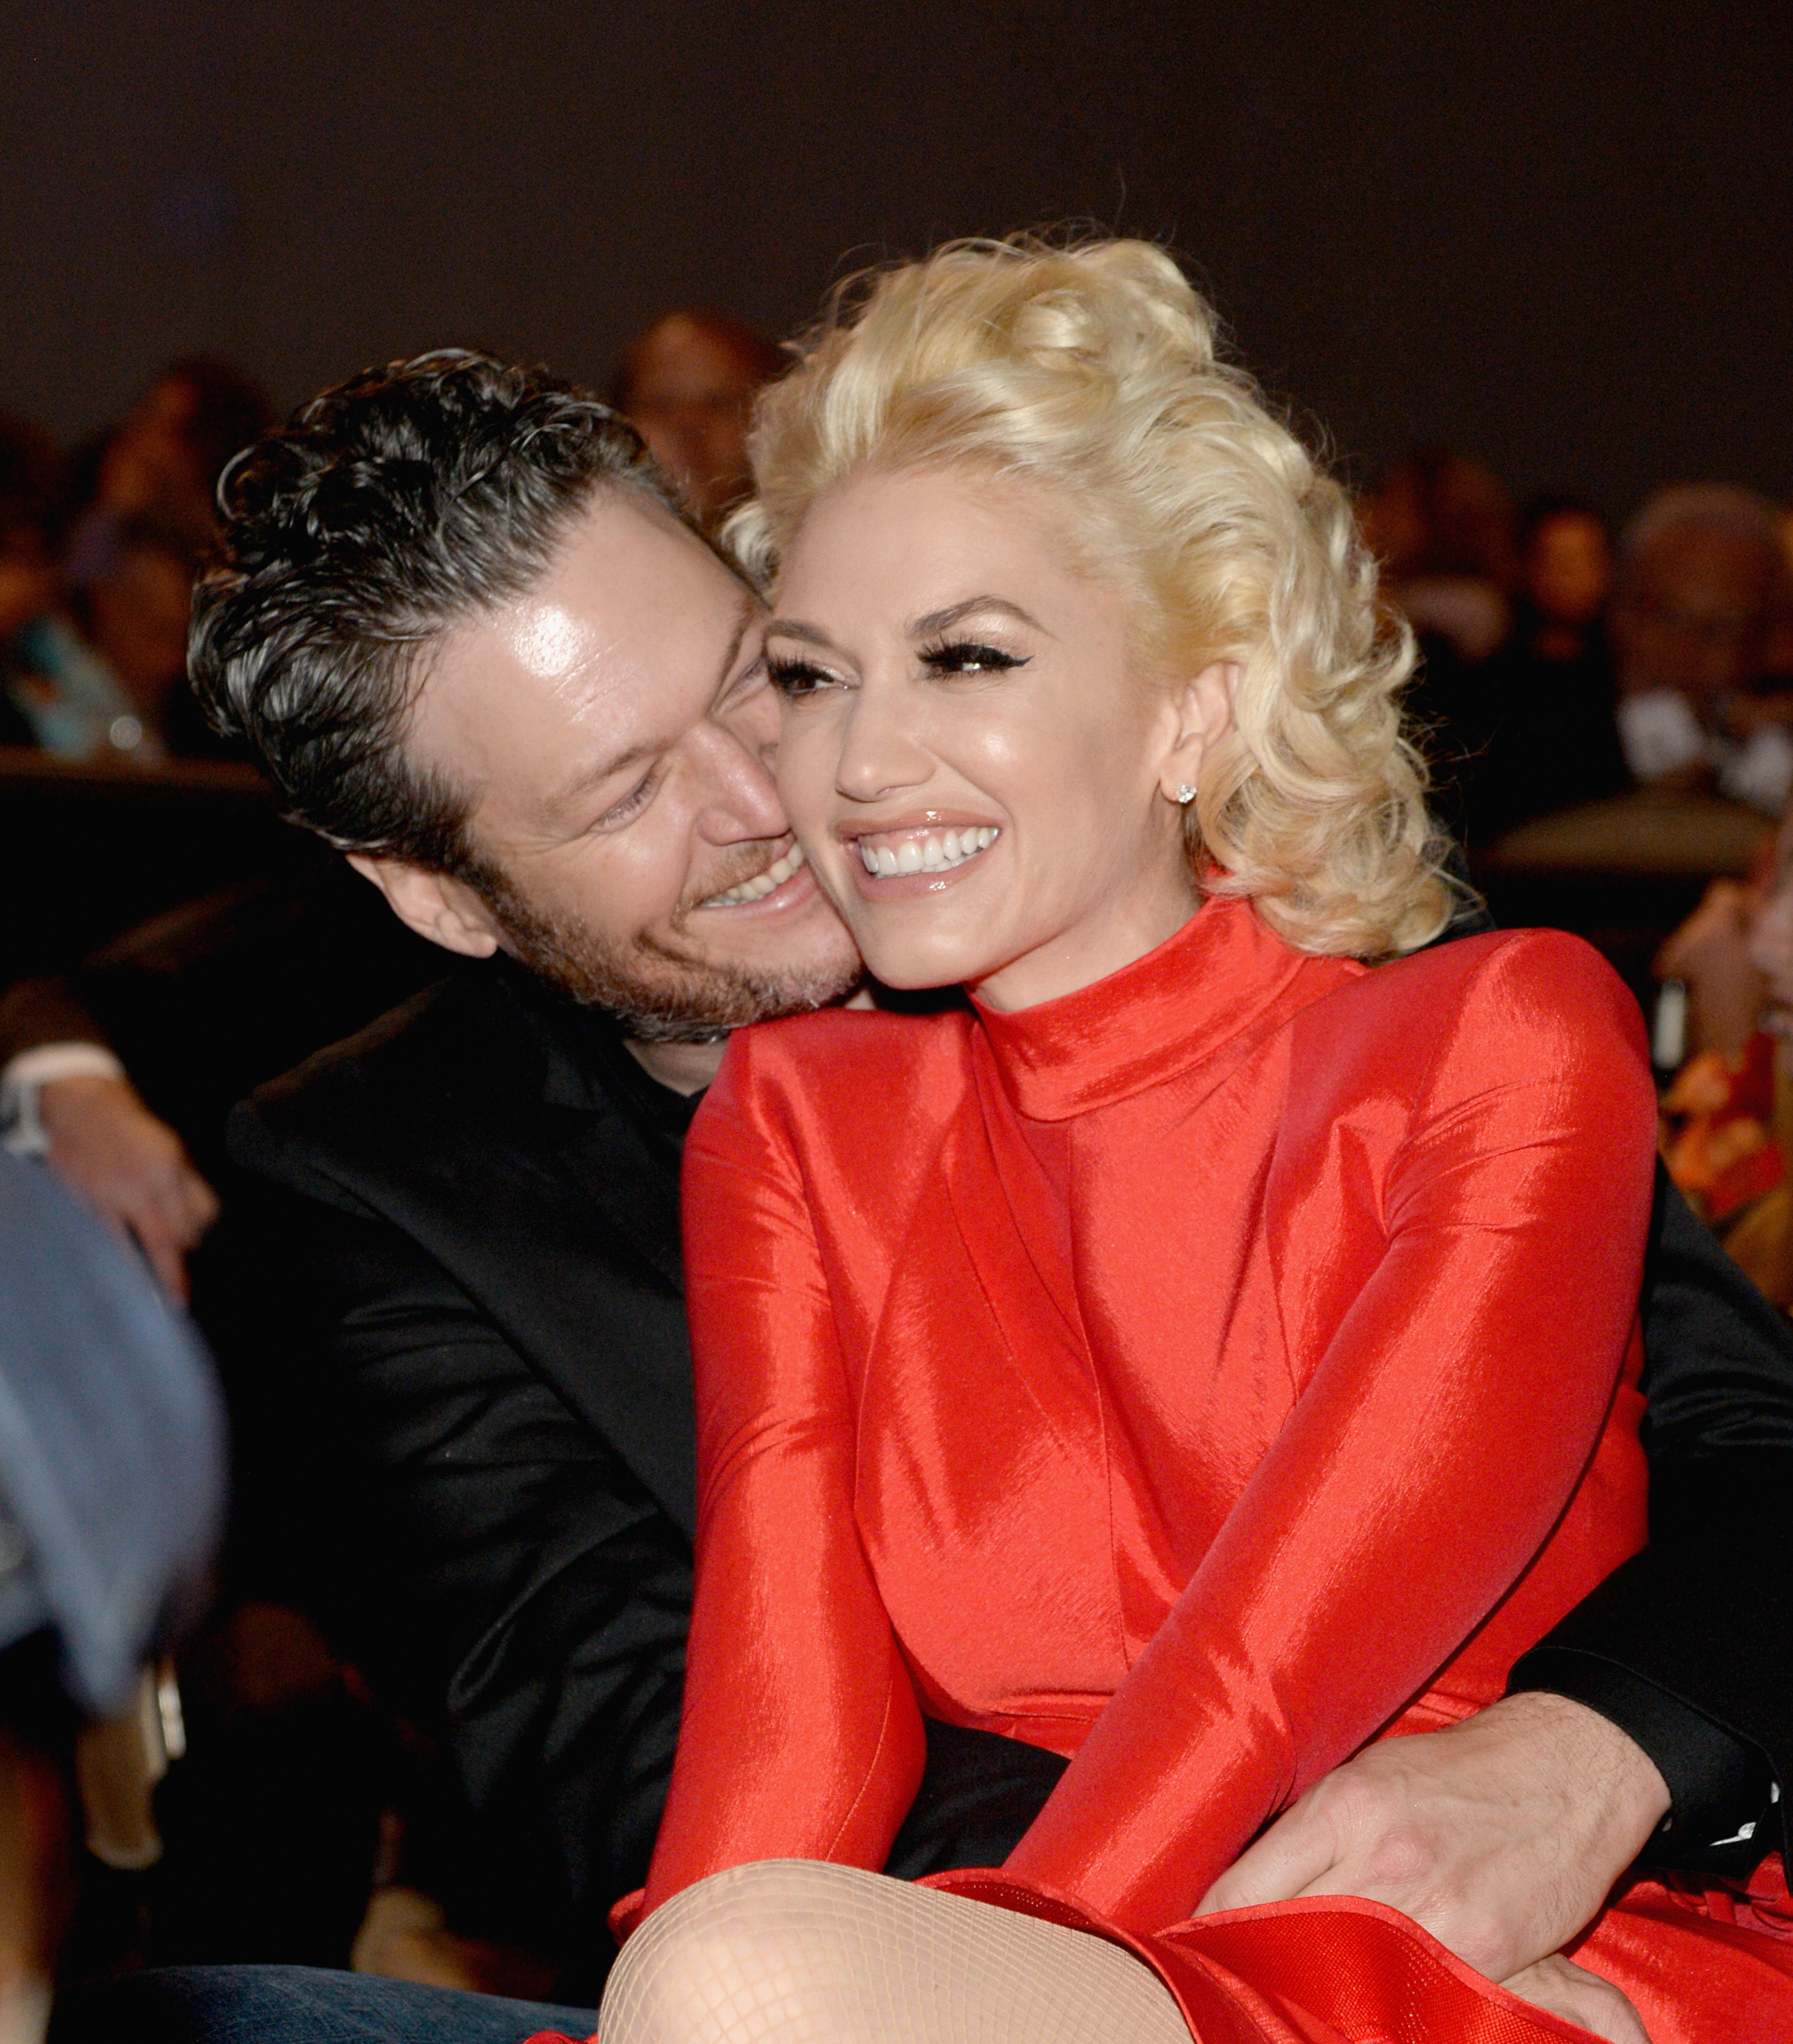 Blake Shelton and Gwen Stefani in Beverly Hills, California, on February 14, 2016. | Source: Getty Images